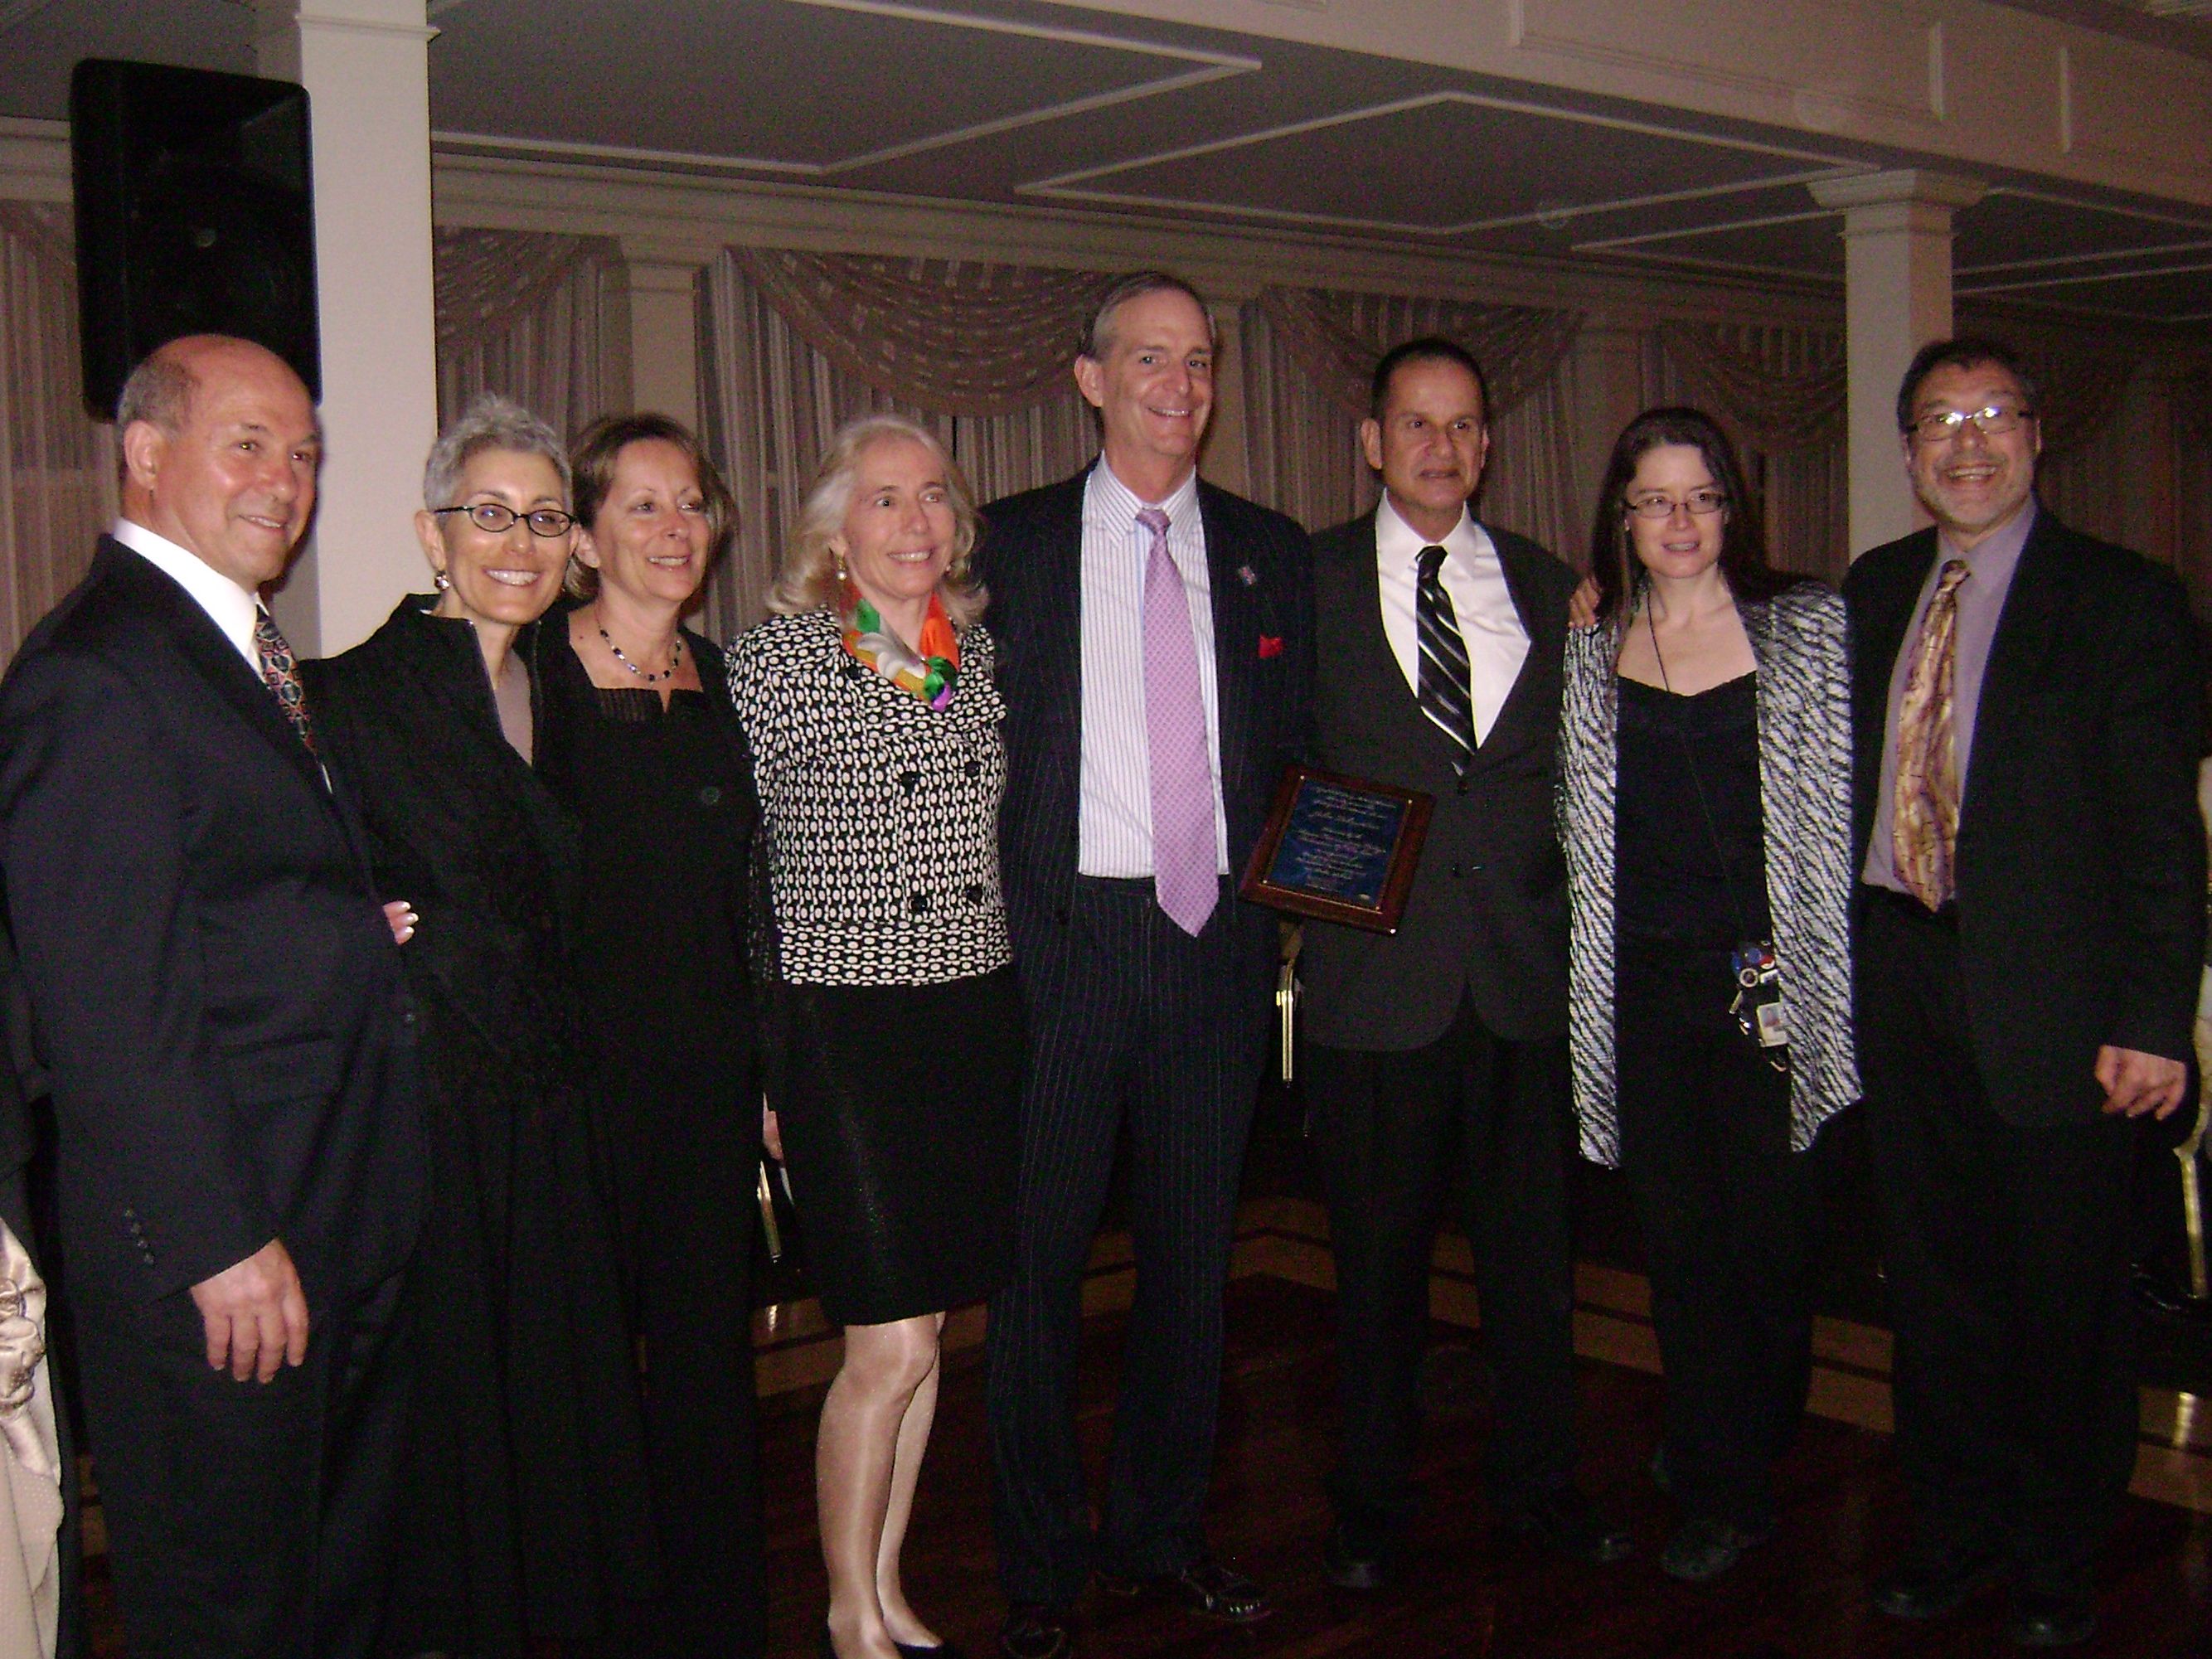 John LeBoutillier receives a Friend of Education Award from NYSUT at the Long Island Directors Dinner on March 25, 2010